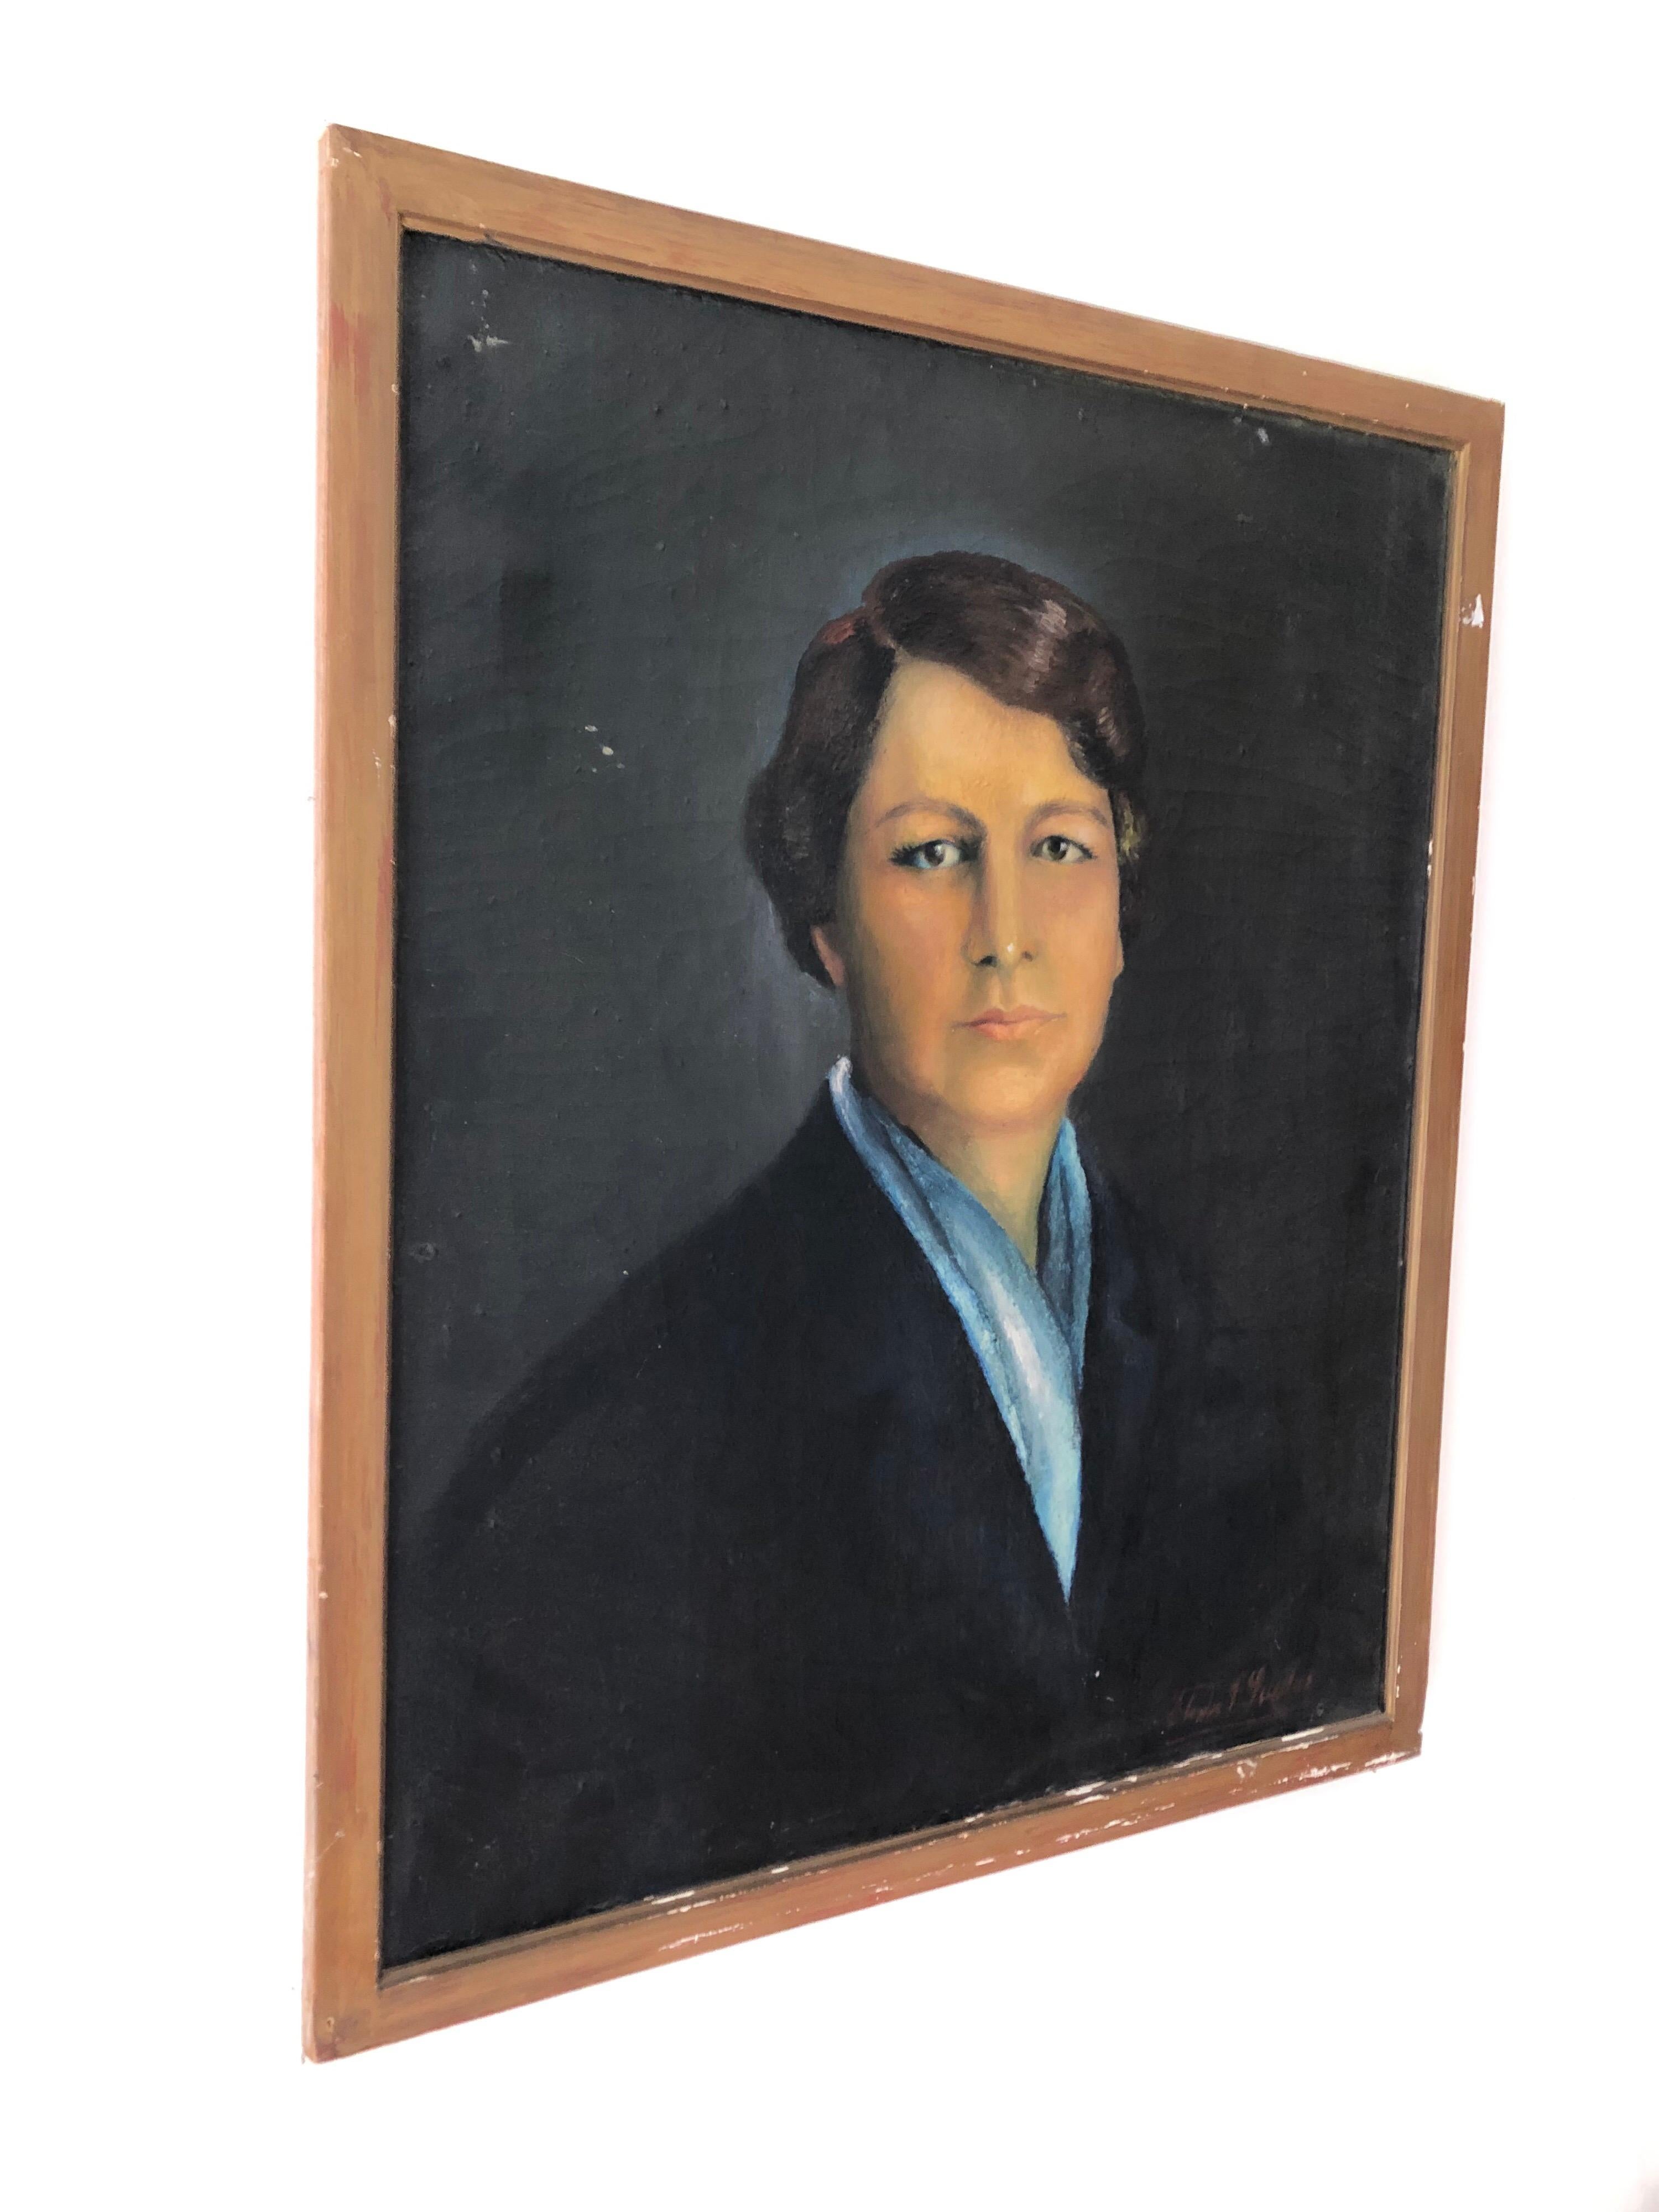 An early 20th century oil on canvas portrait of an Argentinian woman. In original wood frame. Illegibly signed lower right.
Measures: Sight 23.25